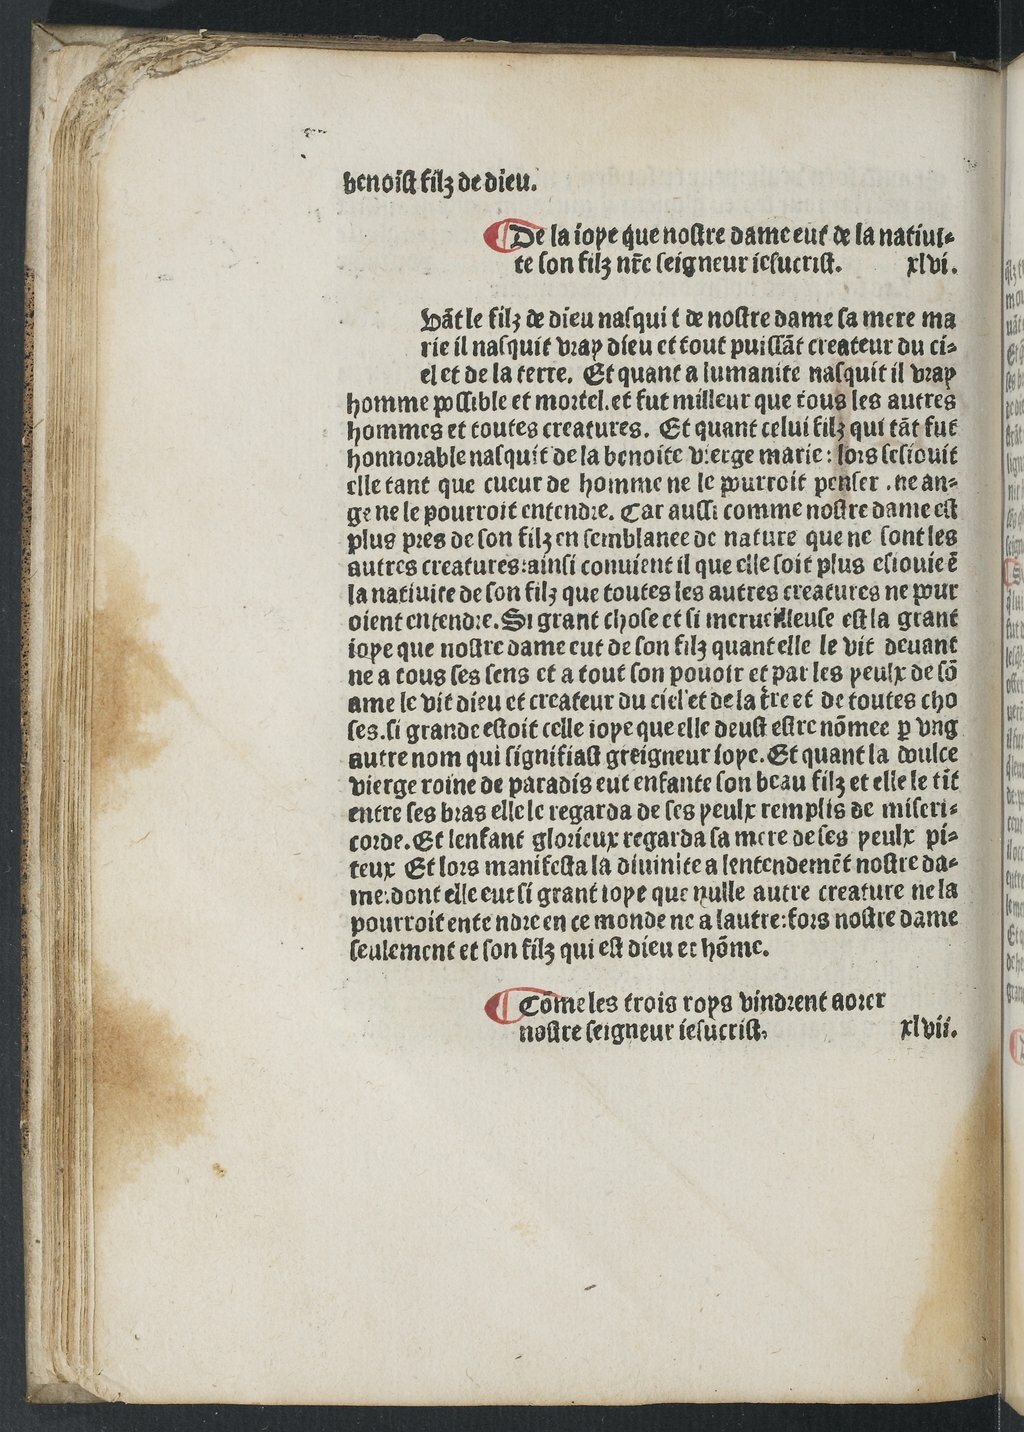 1482 [Antoine Caillaut] Trésor des humains BnF_Page_064.jpg